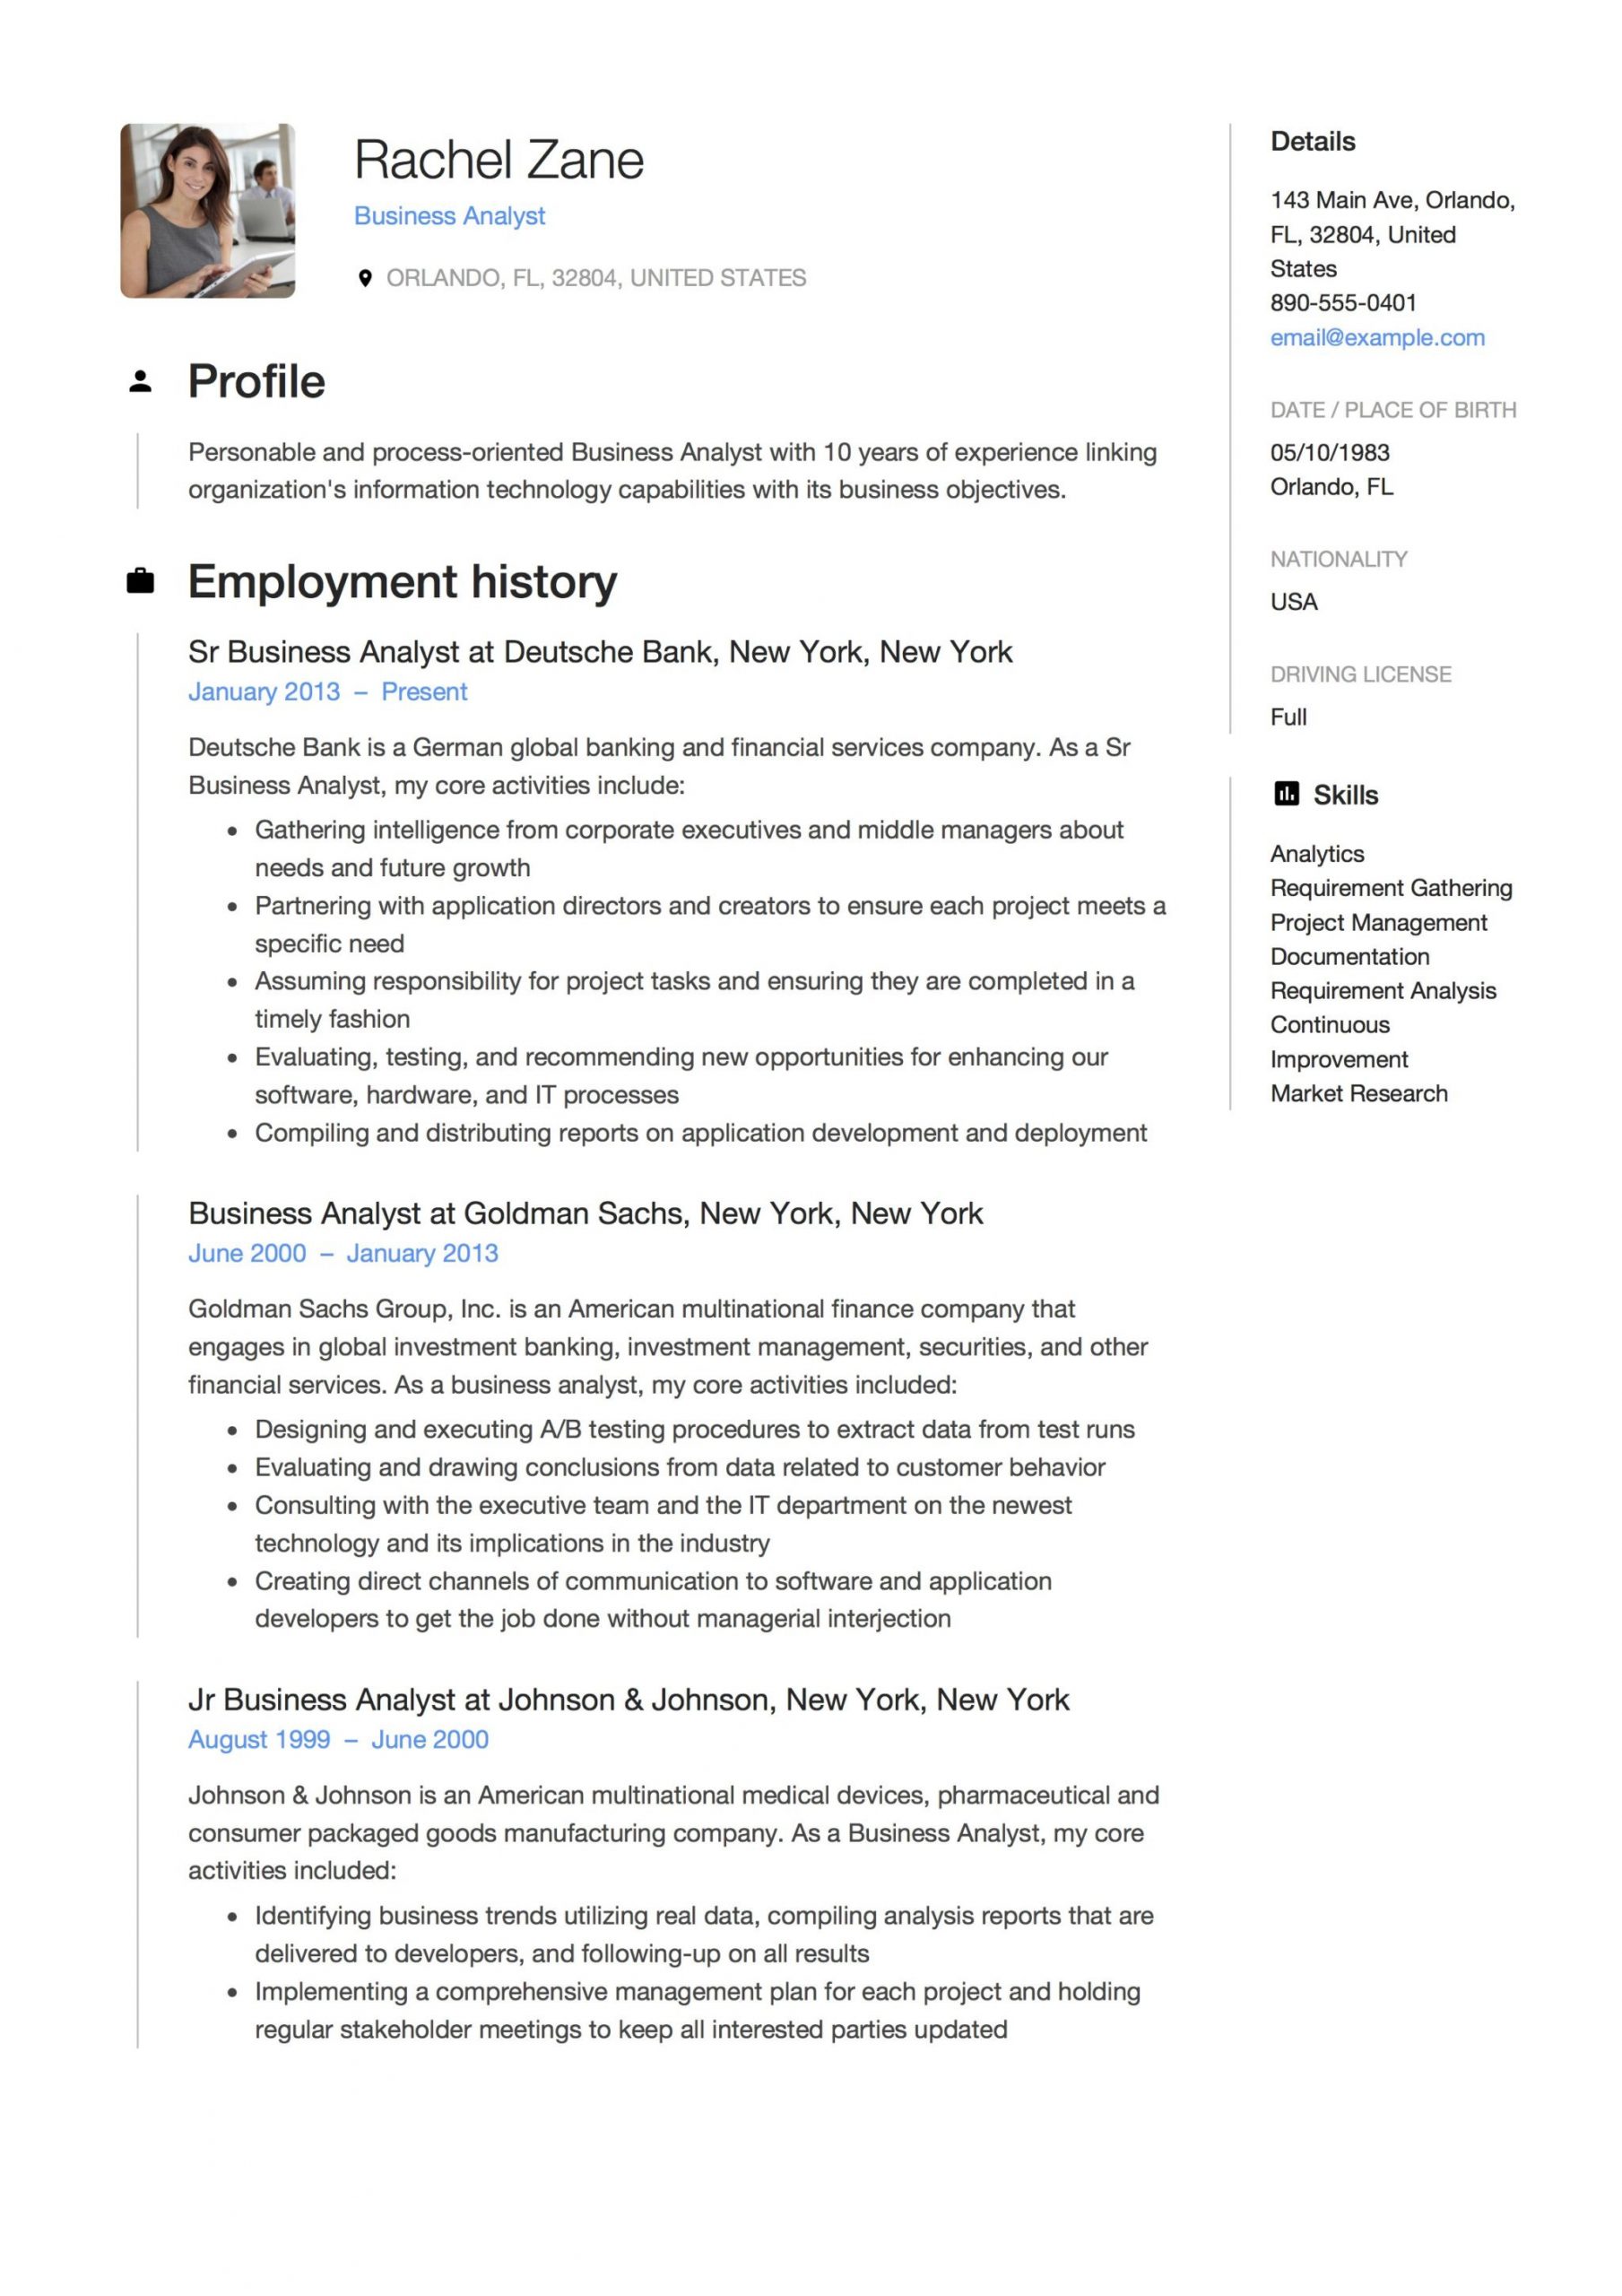 Sample Resume Summary for Business Analyst Business Analyst Resume & Guide 12 Templates Pdf